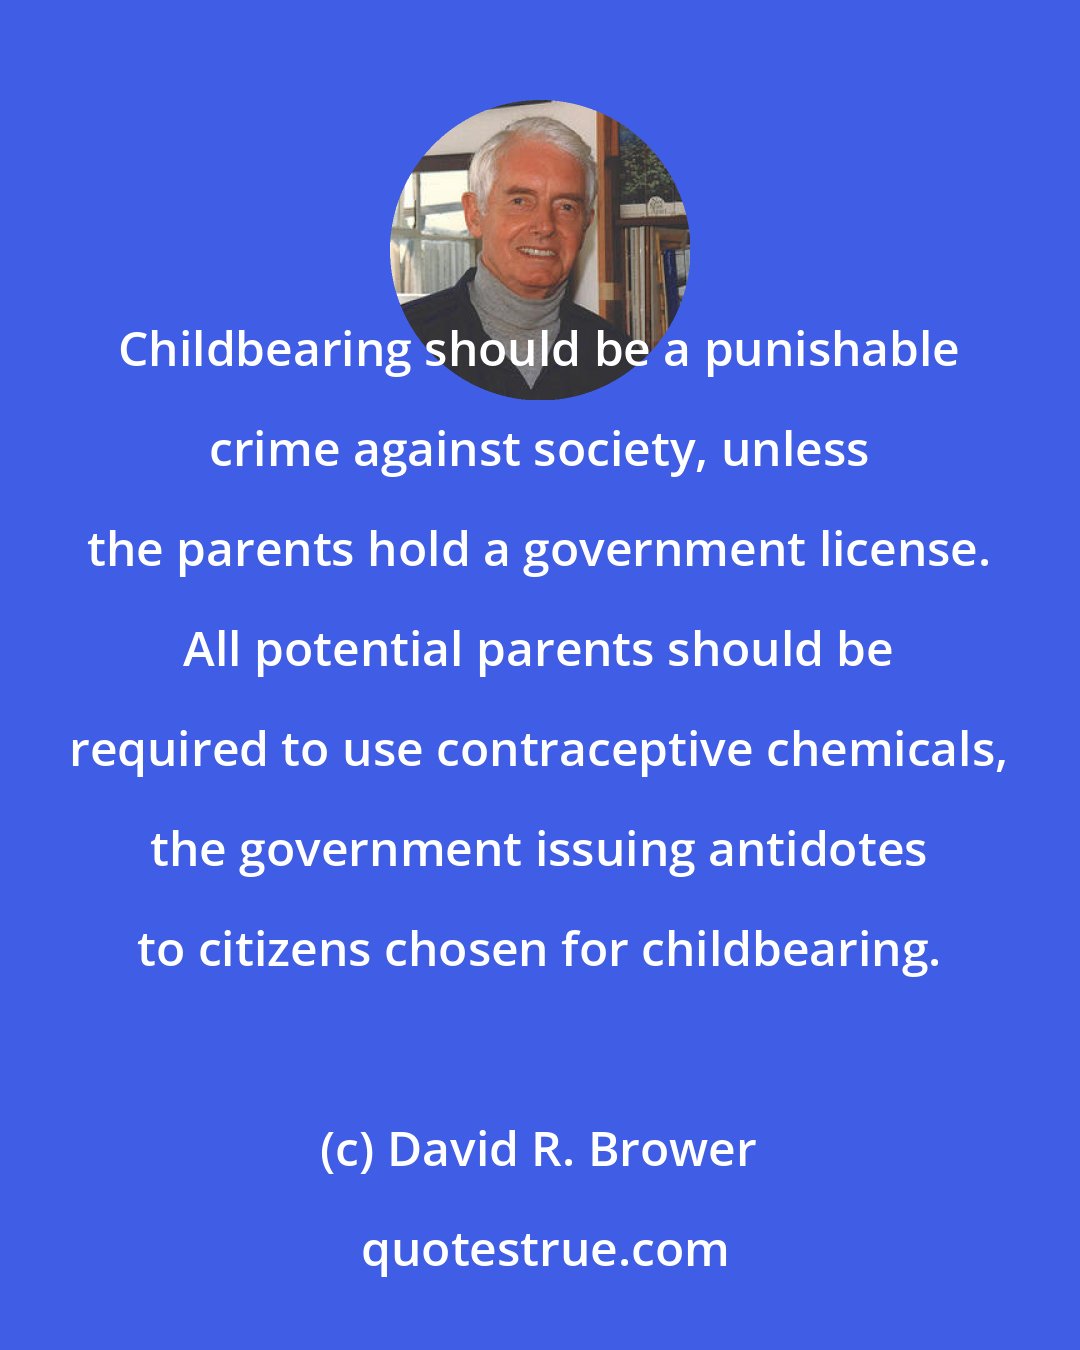 David R. Brower: Childbearing should be a punishable crime against society, unless the parents hold a government license. All potential parents should be required to use contraceptive chemicals, the government issuing antidotes to citizens chosen for childbearing.